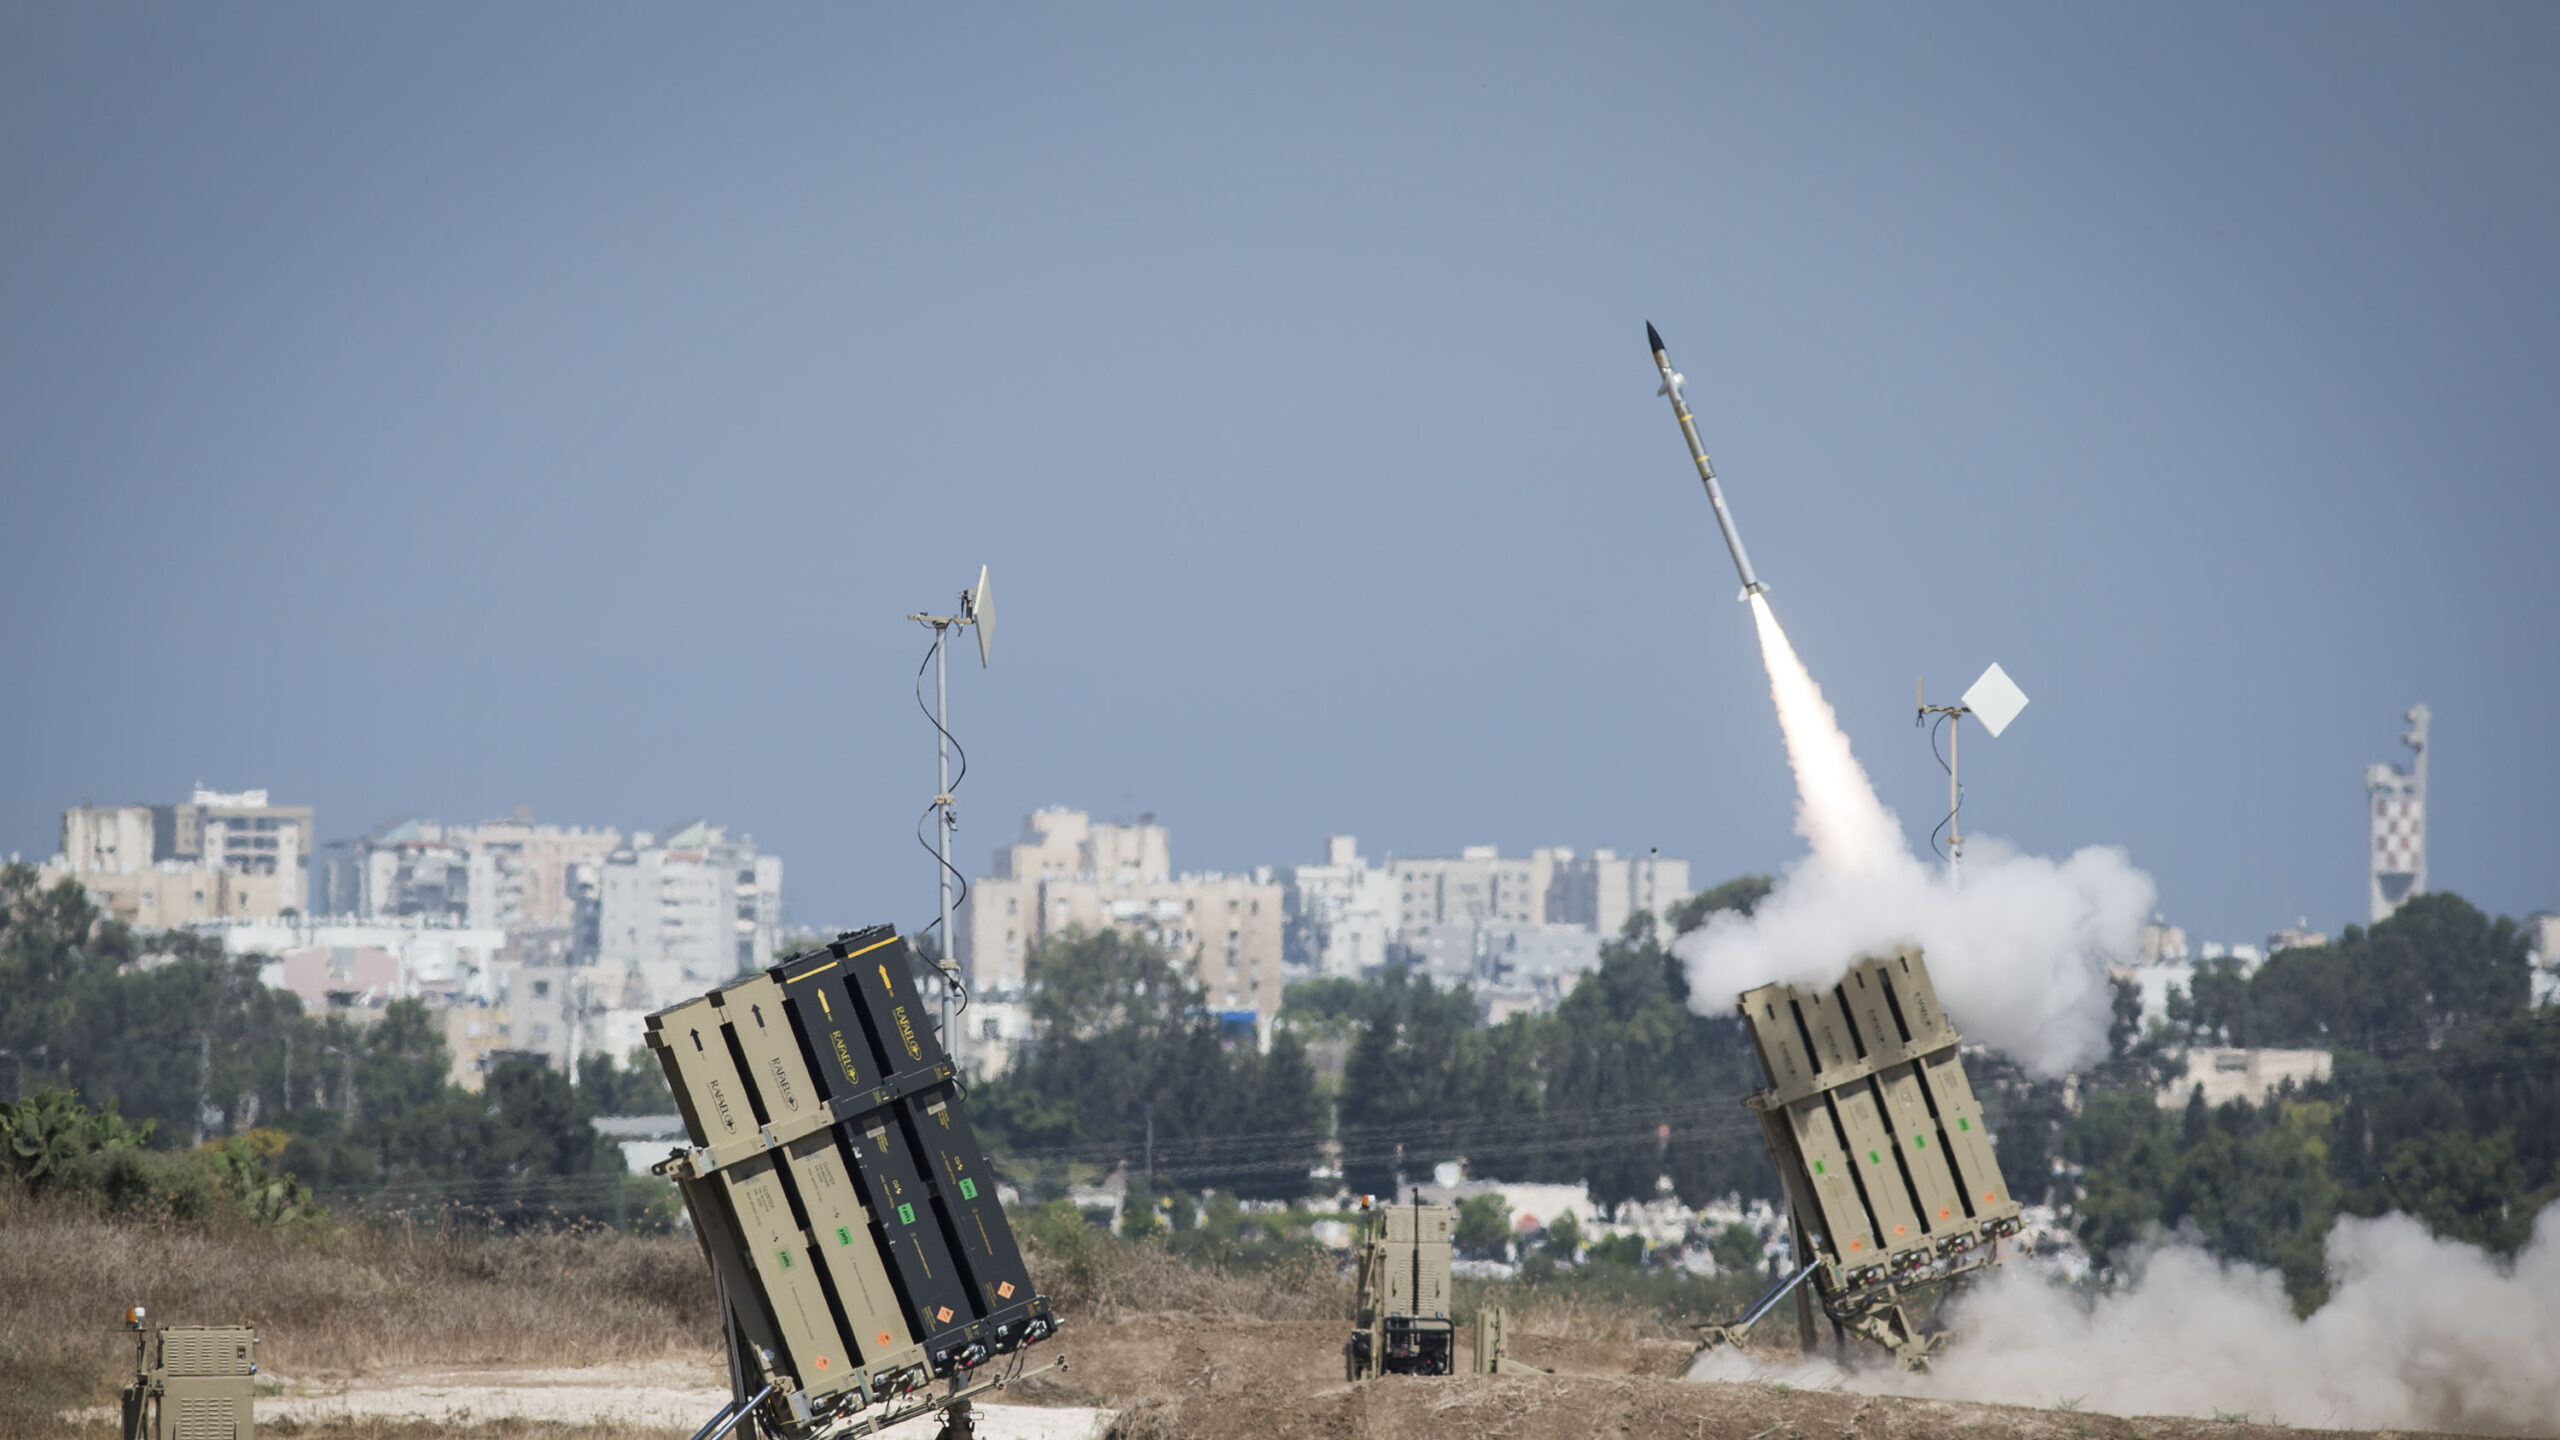 As Iranian munitions kill in Ukraine, pressure builds for Israel to reassess its Russian balancing act